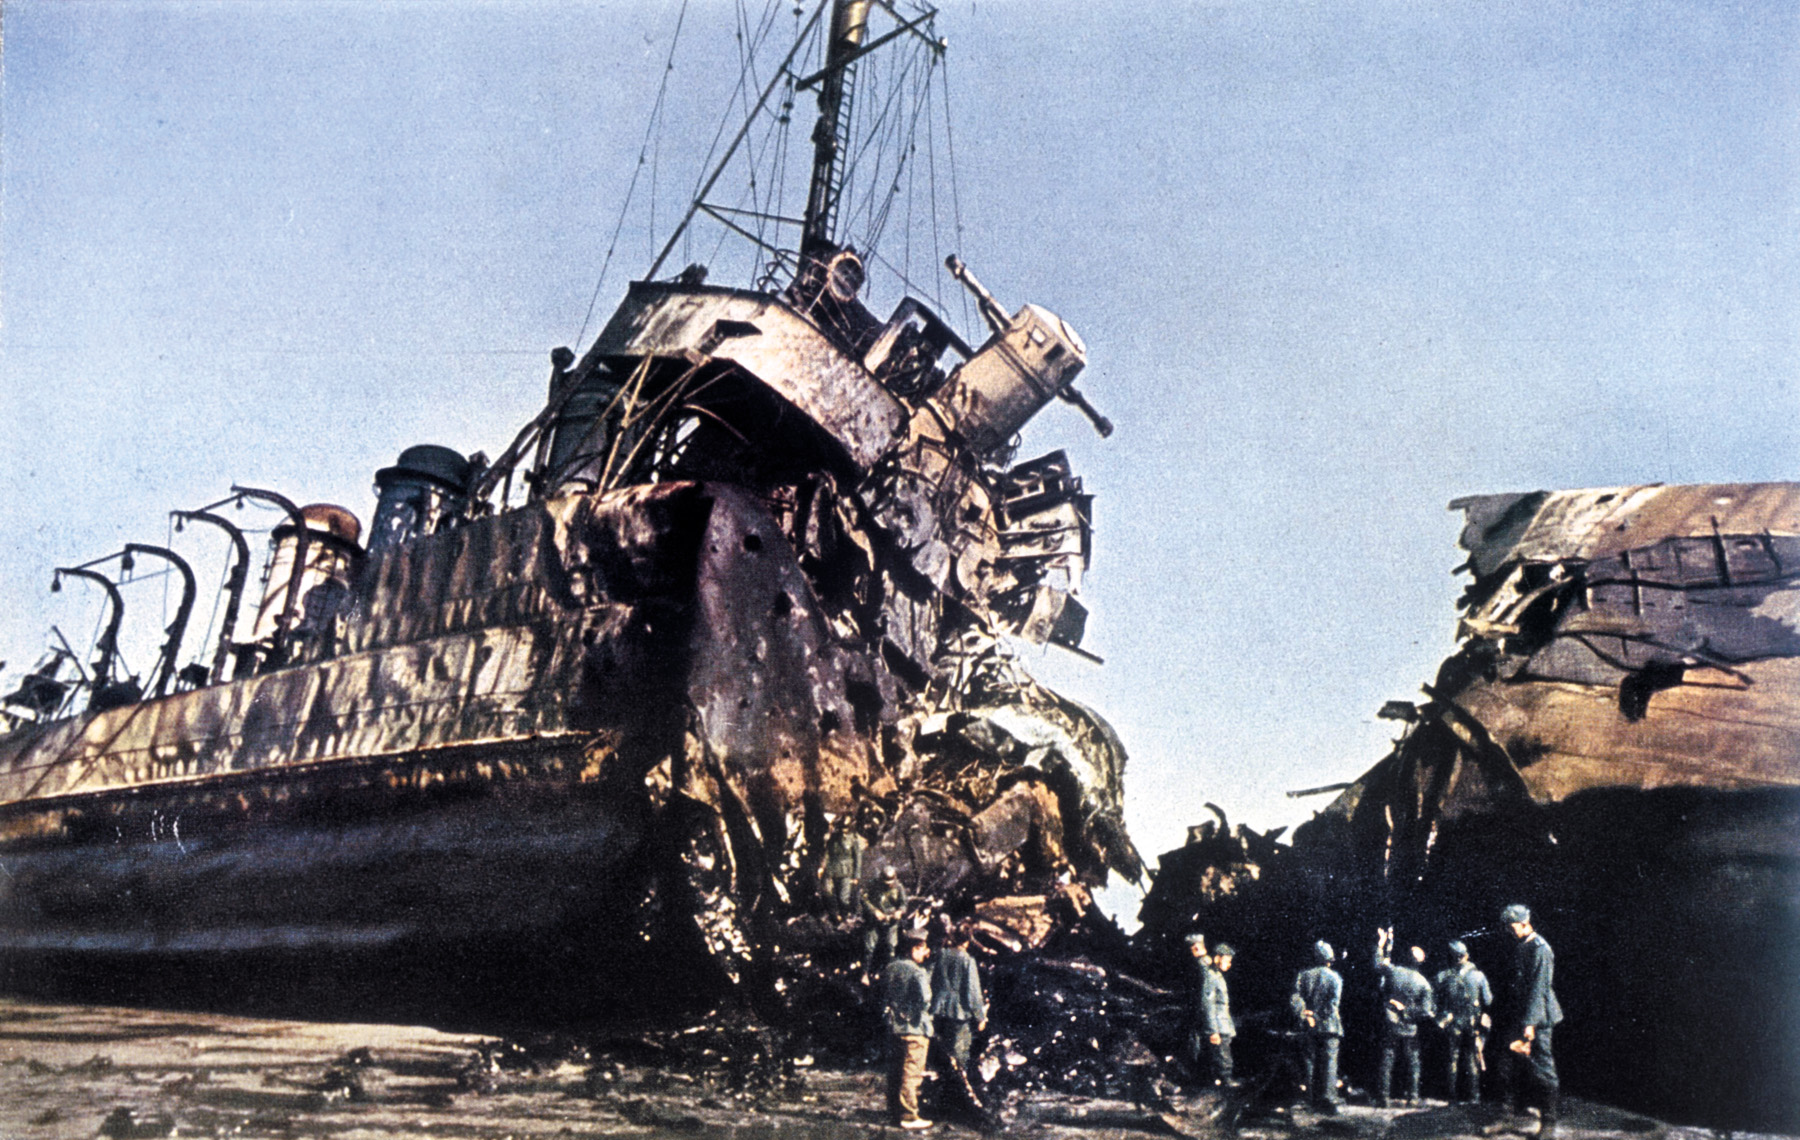 After the British have evacuated, German soldiers inspect the hulk of a ship beached at Dunkirk. The vessel was wrecked by a single Luftwaffe bomb that detonated, cutting the ship in half.